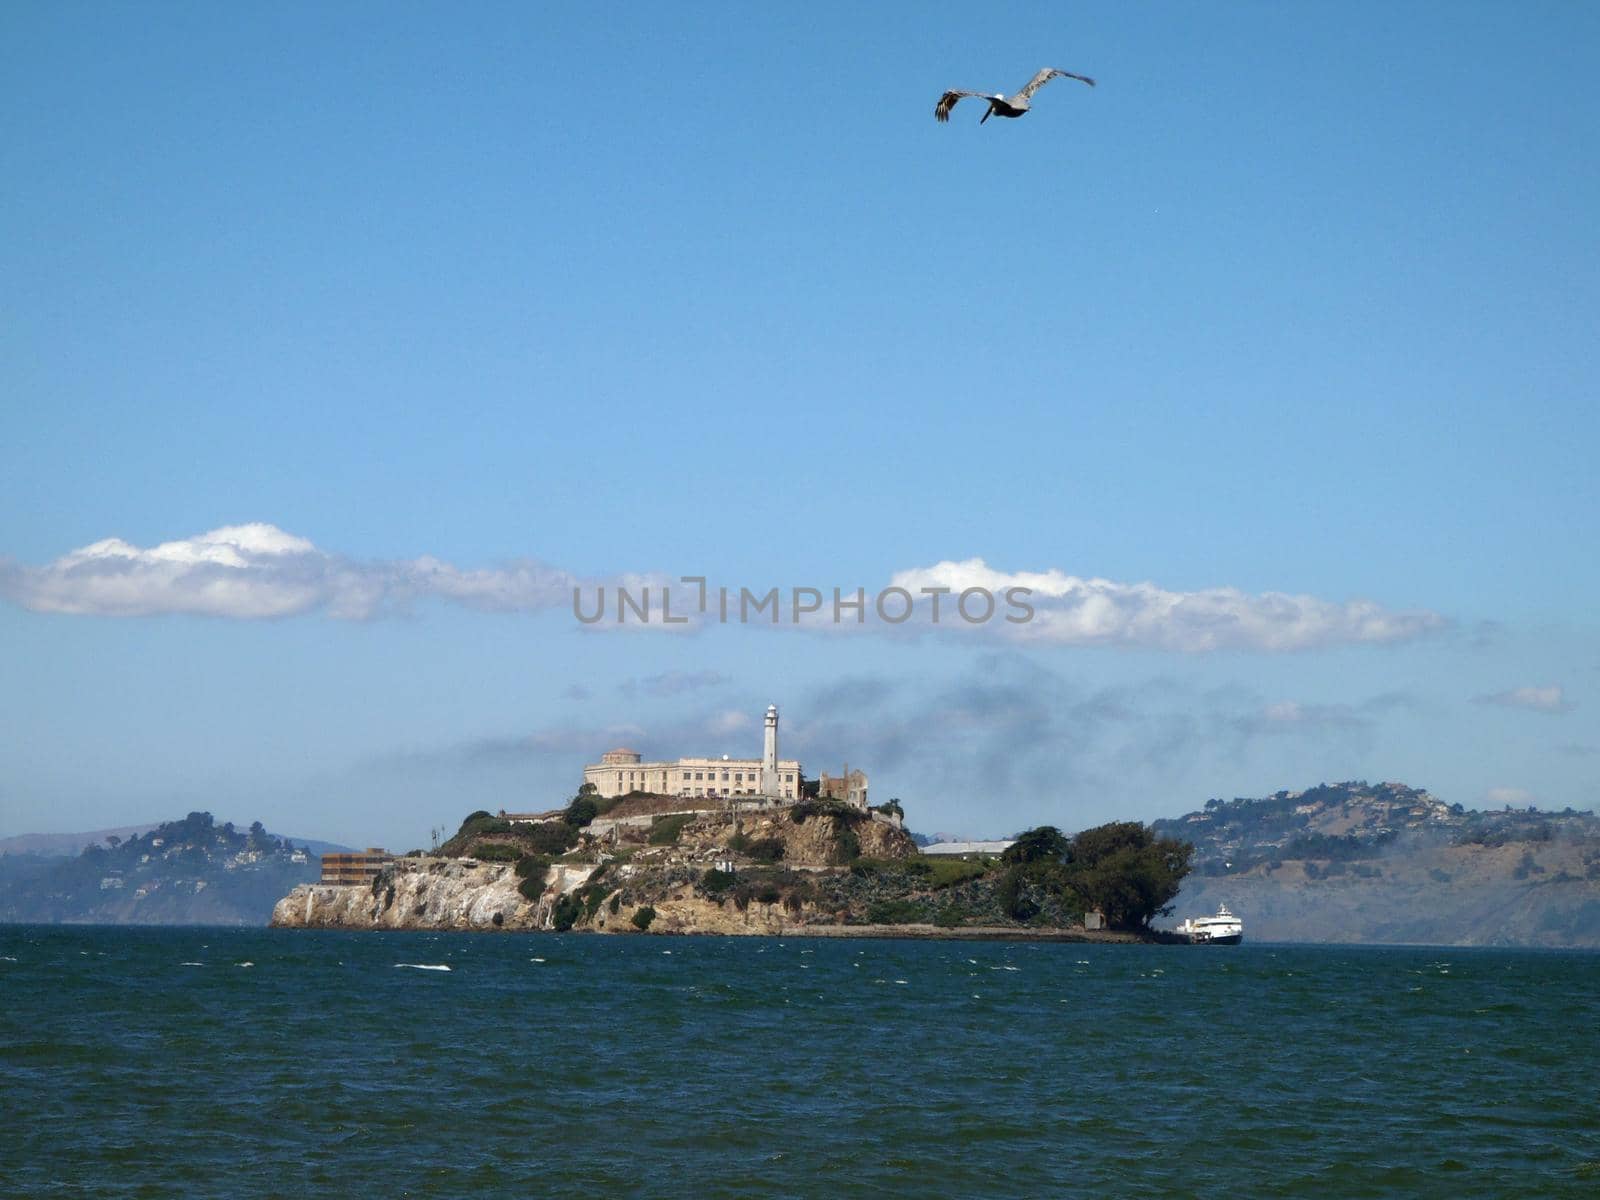 Seagull flies in the air with Alcatraz Island with Lighthouse and Prison in view on a nice Day in San Francisco Bay.